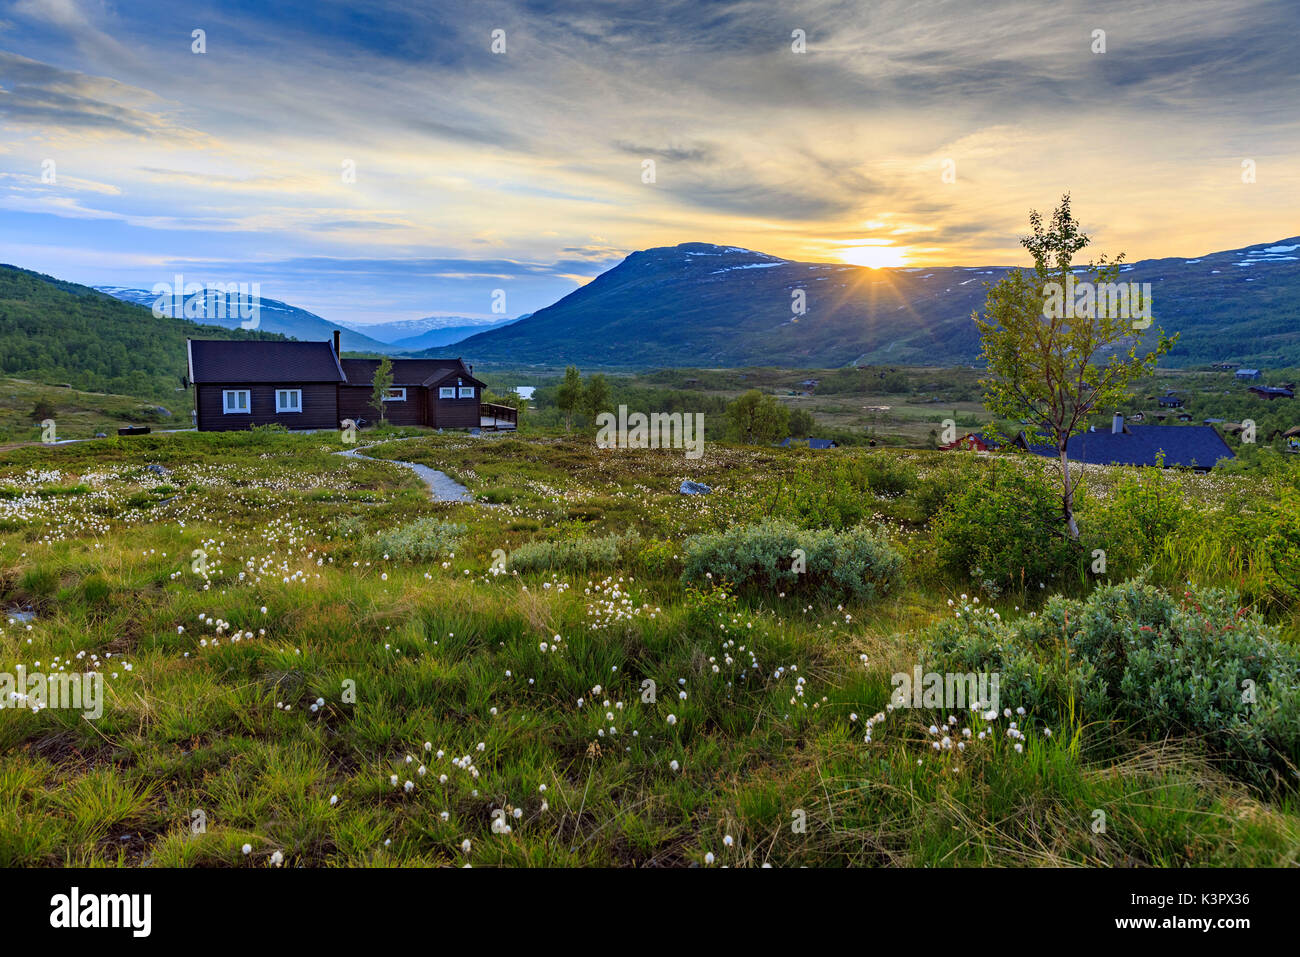 Sunset in the Hardangervidda National Park in Norway with the typical houses immersed into the grass filled by nordic cottongrass, Hordaland Stock Photo